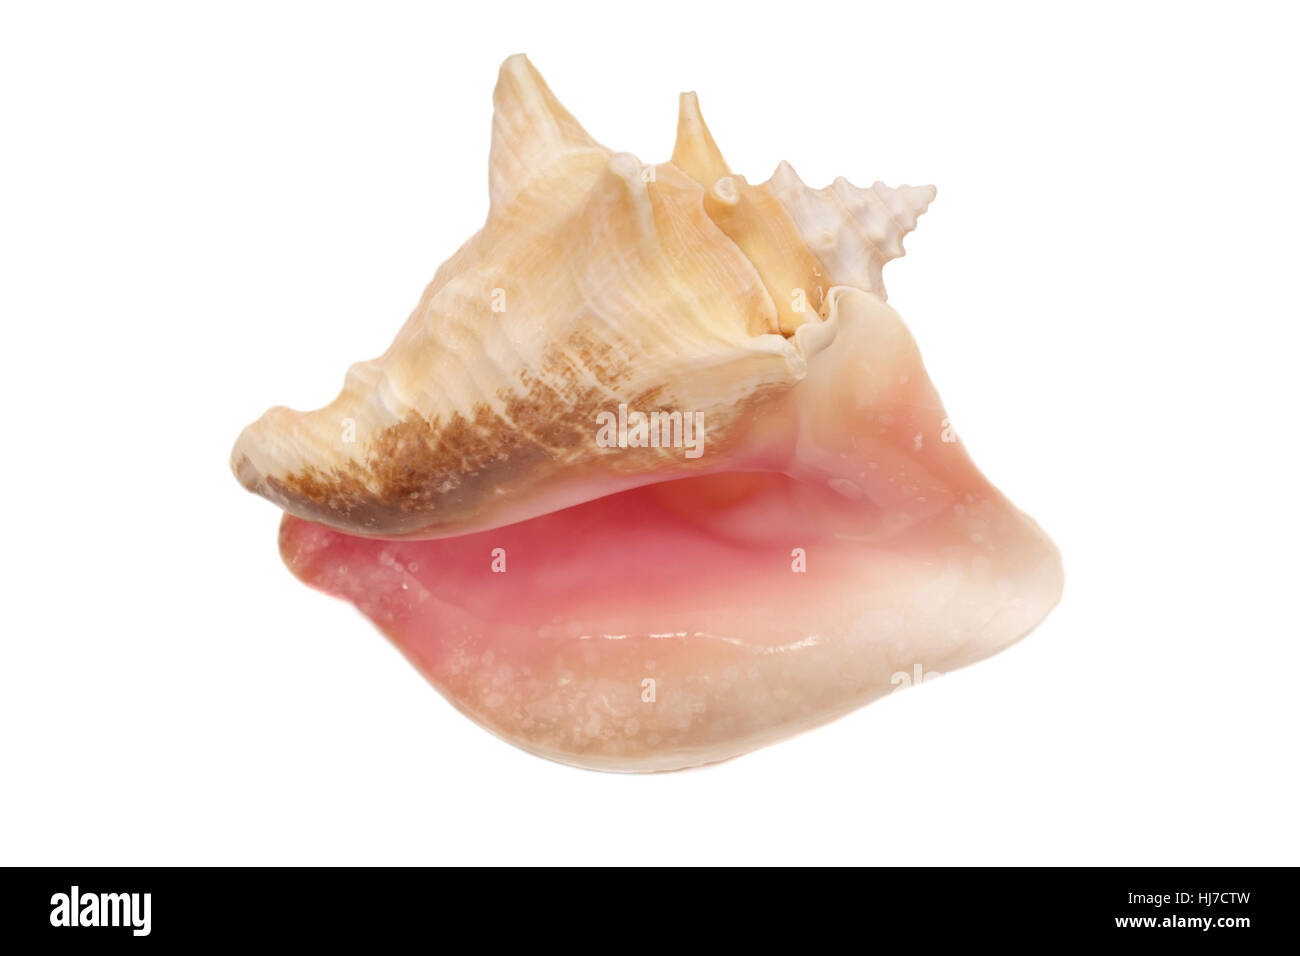 Big conch close up isolated on white background Stock Photo